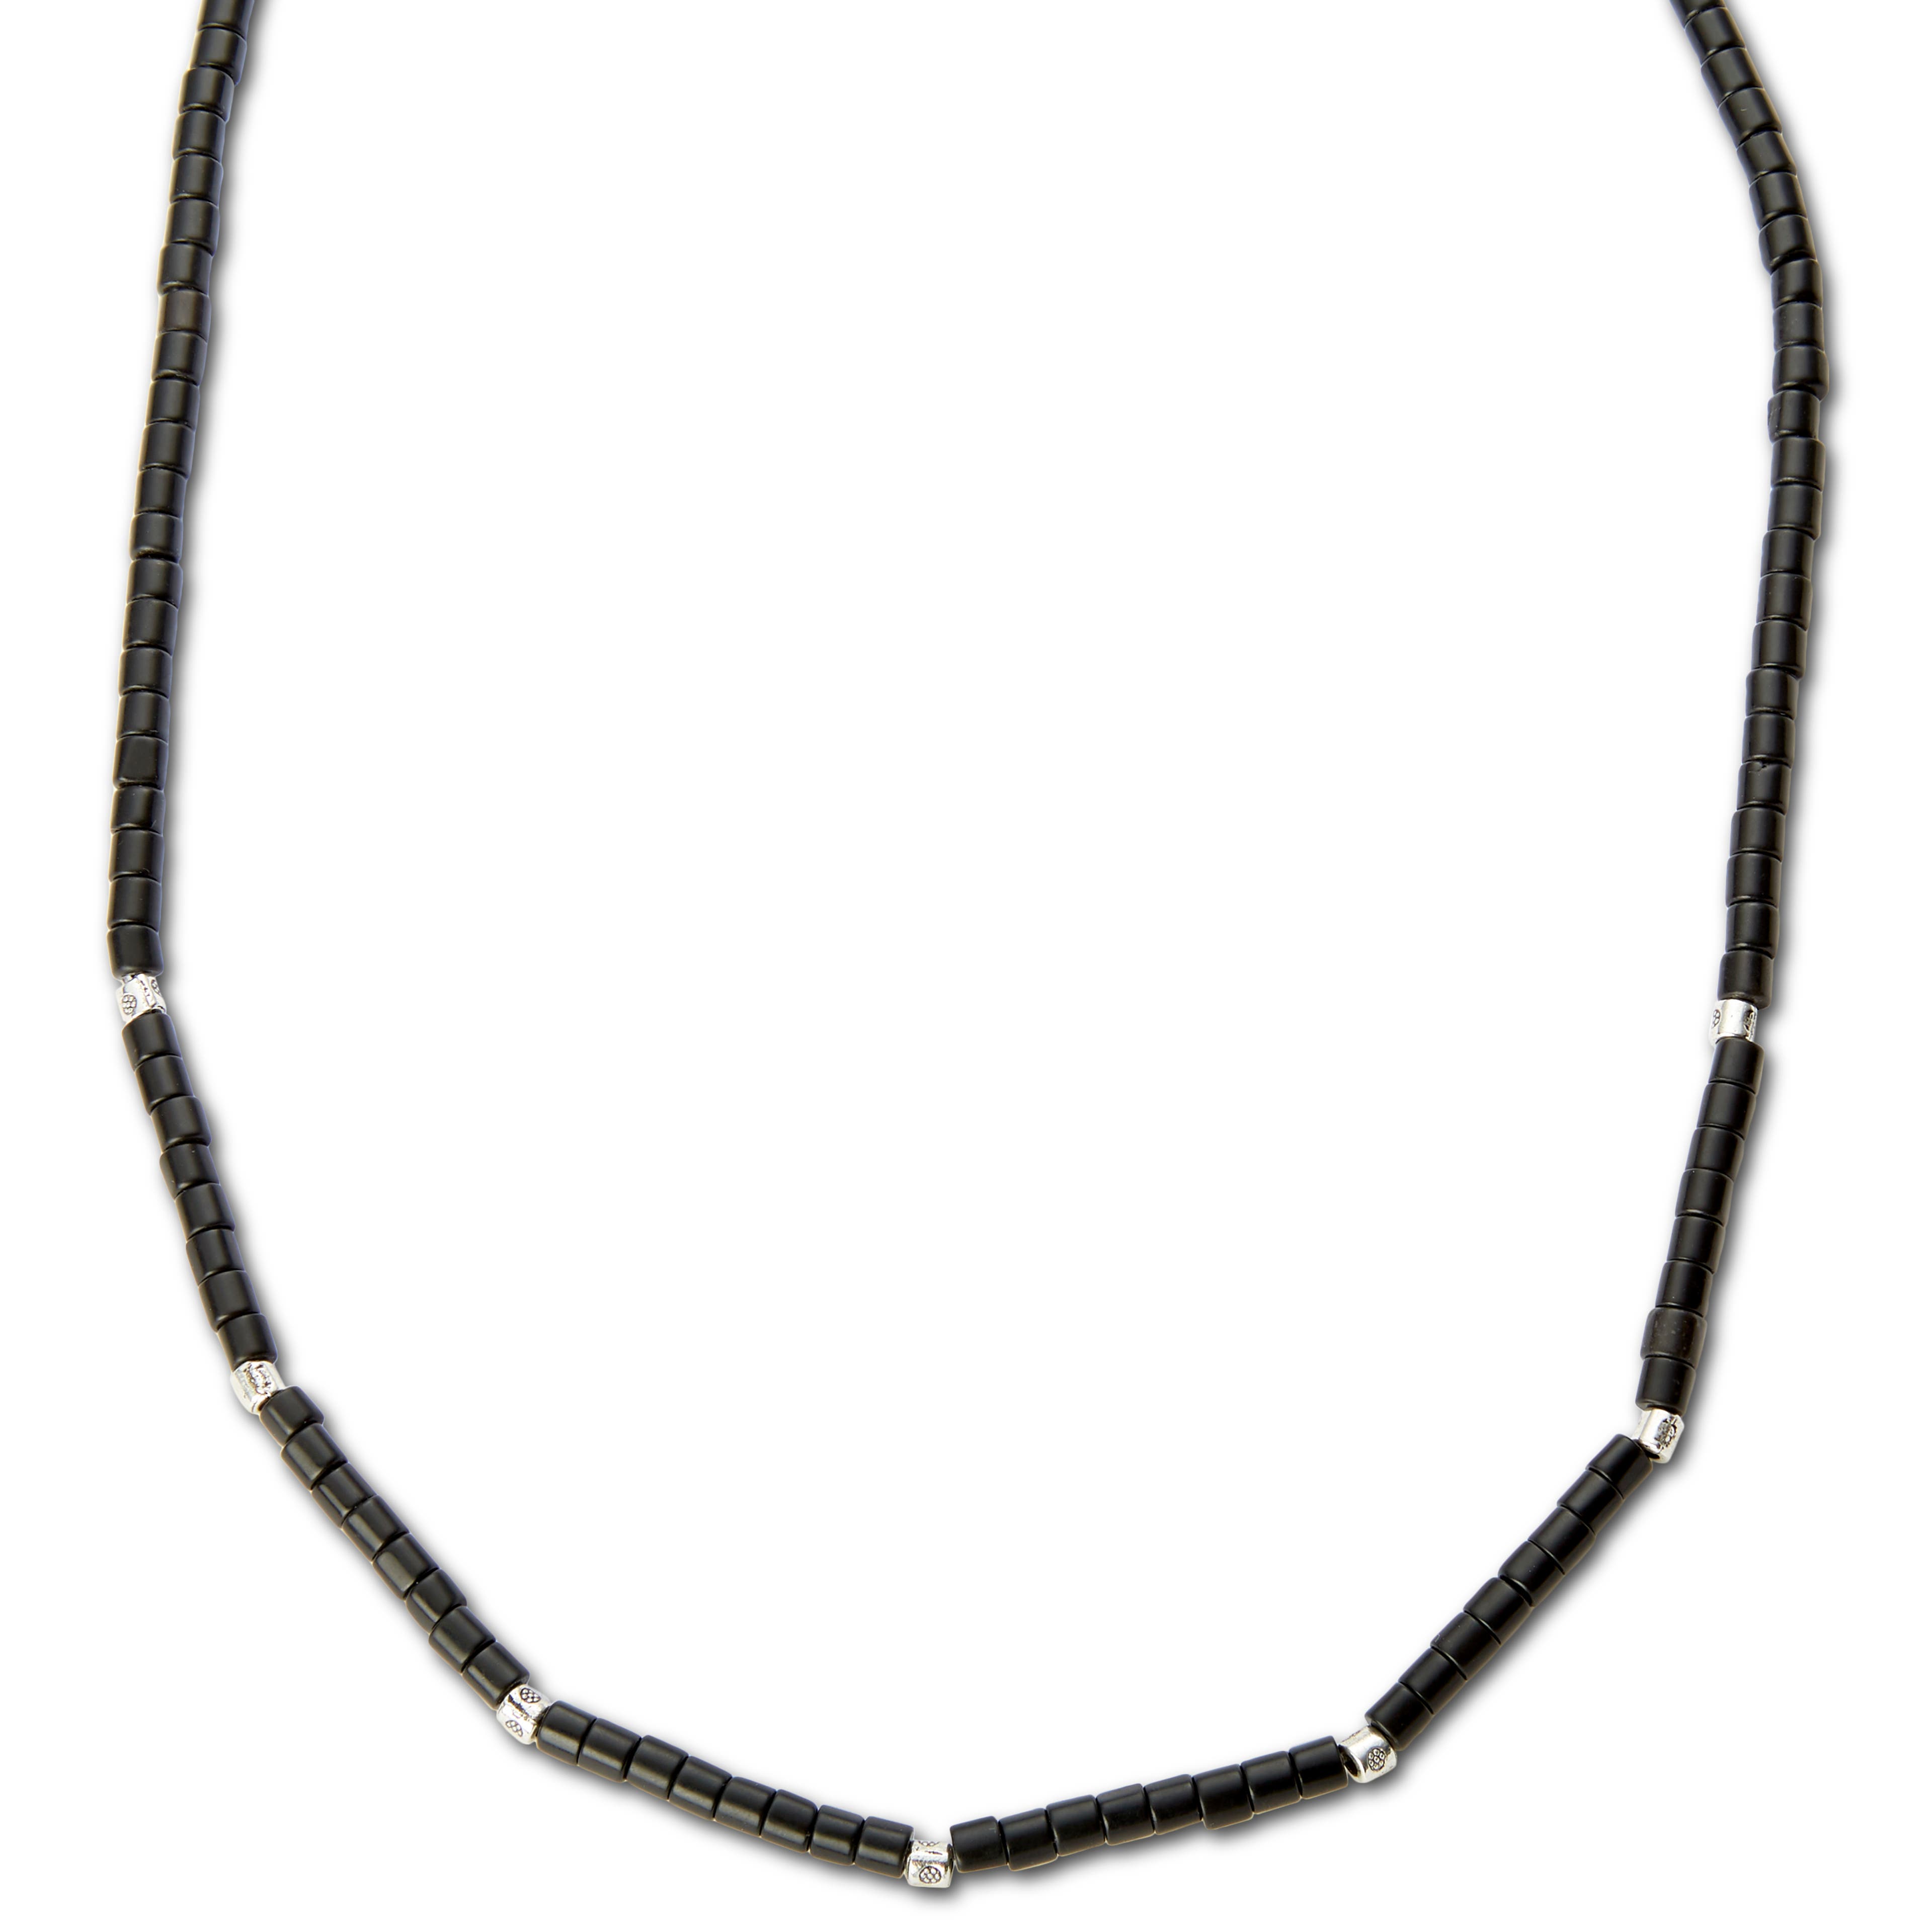 Simple Black Beaded Necklace